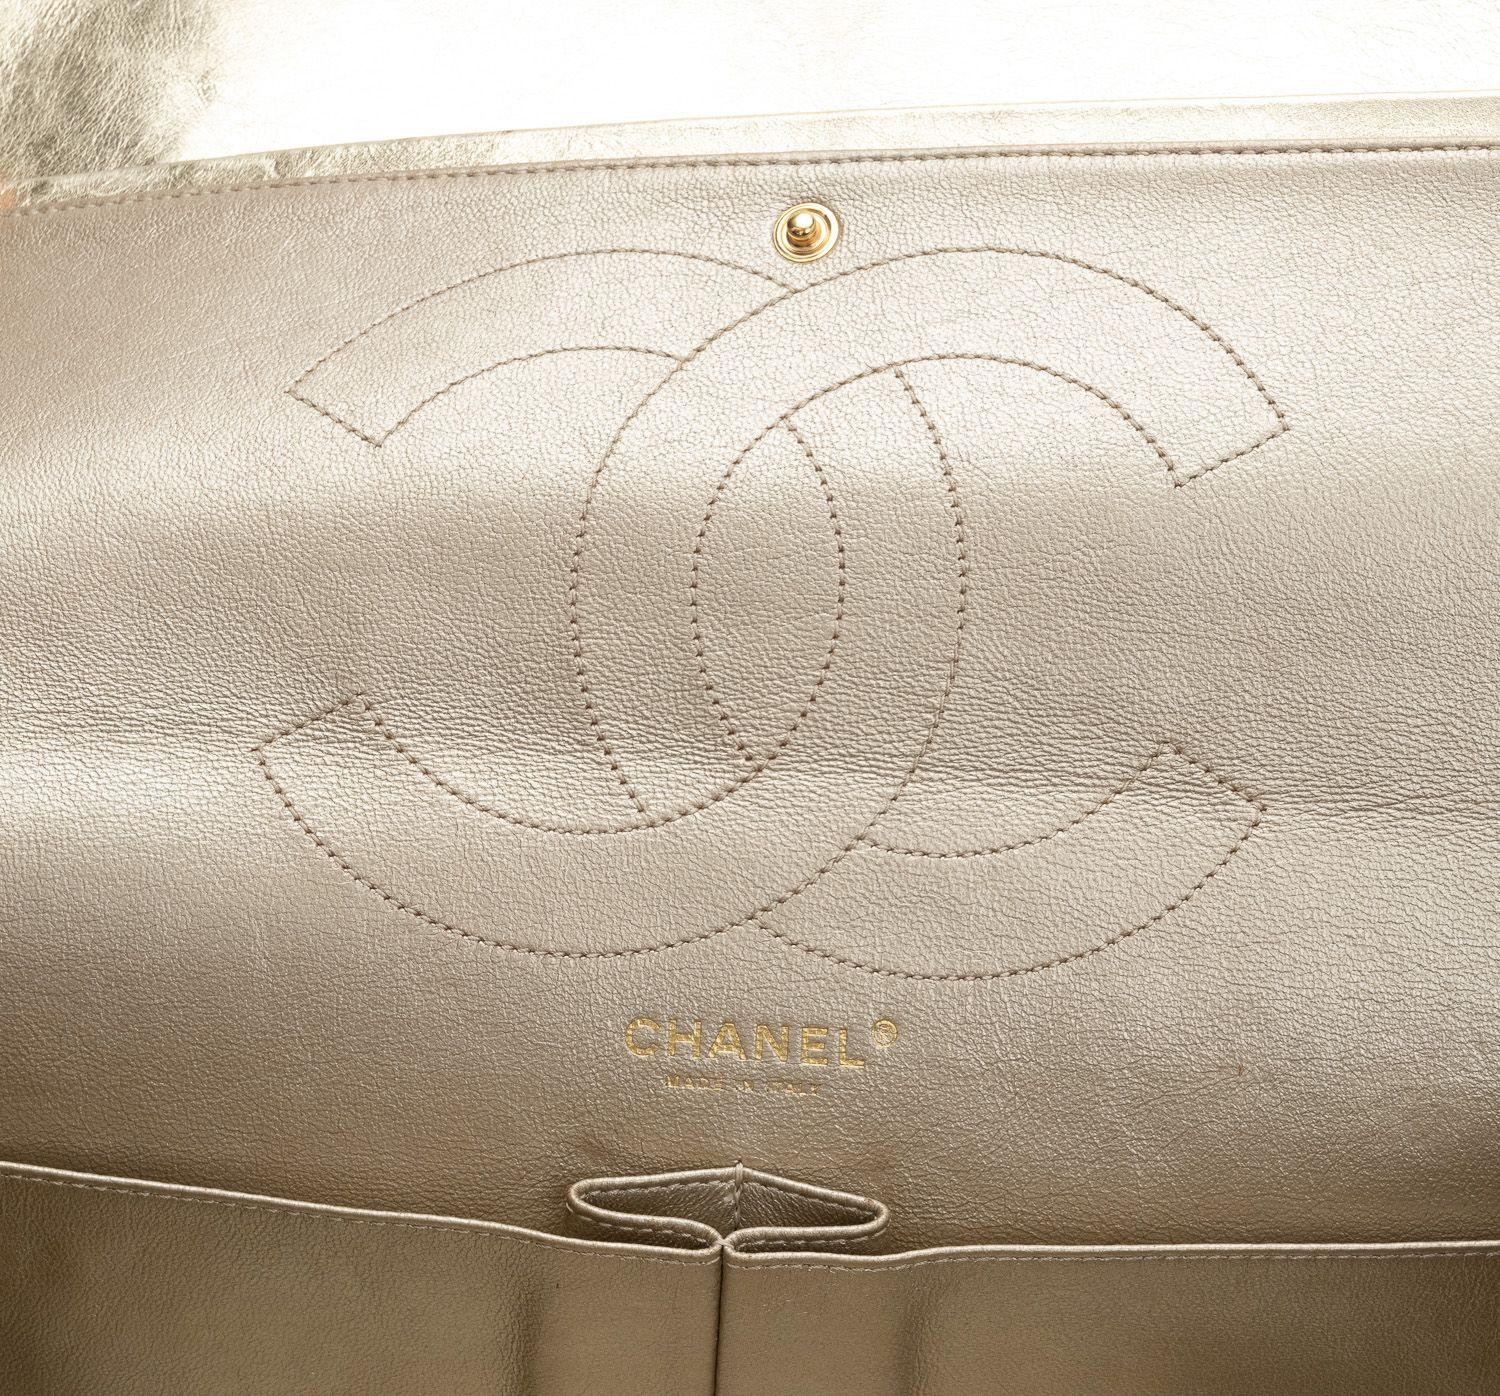 Chanel Gold Metallic Maxi Reissue Flap For Sale 6